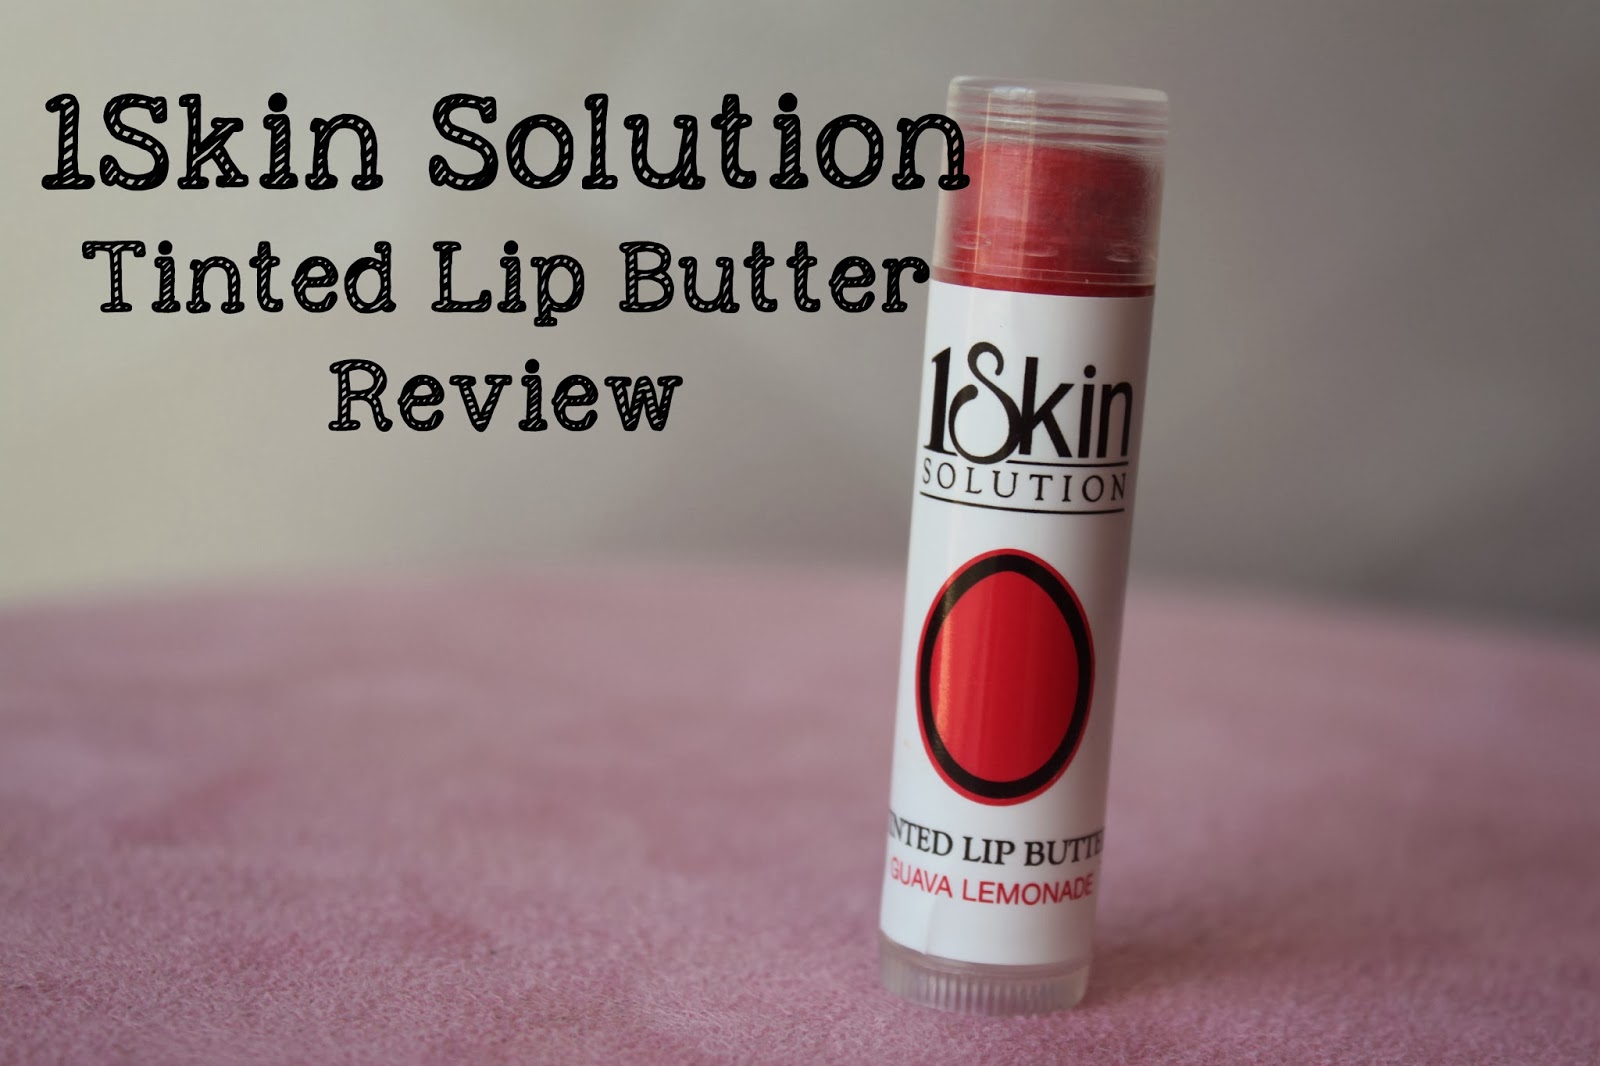 Australian Beauty Review: 1Skin Solution tinted lip butter review